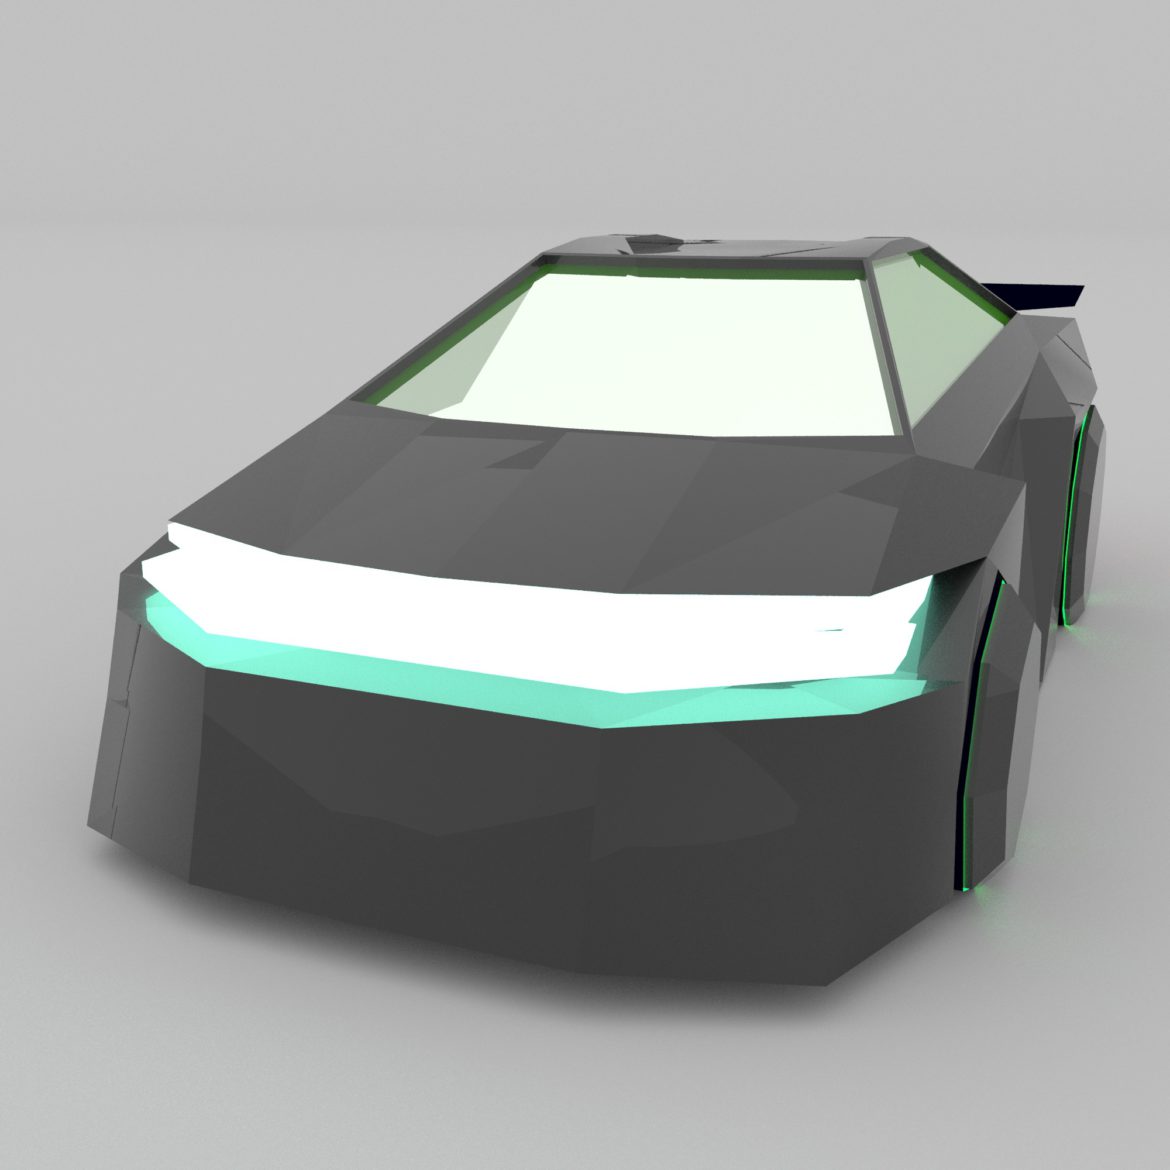  <a class="continue" href="https://www.flatpyramid.com/3d-models/vehicles-3d-models/watercraft/other/neon-car-2/">Continue Reading<span> Neon car</span></a>